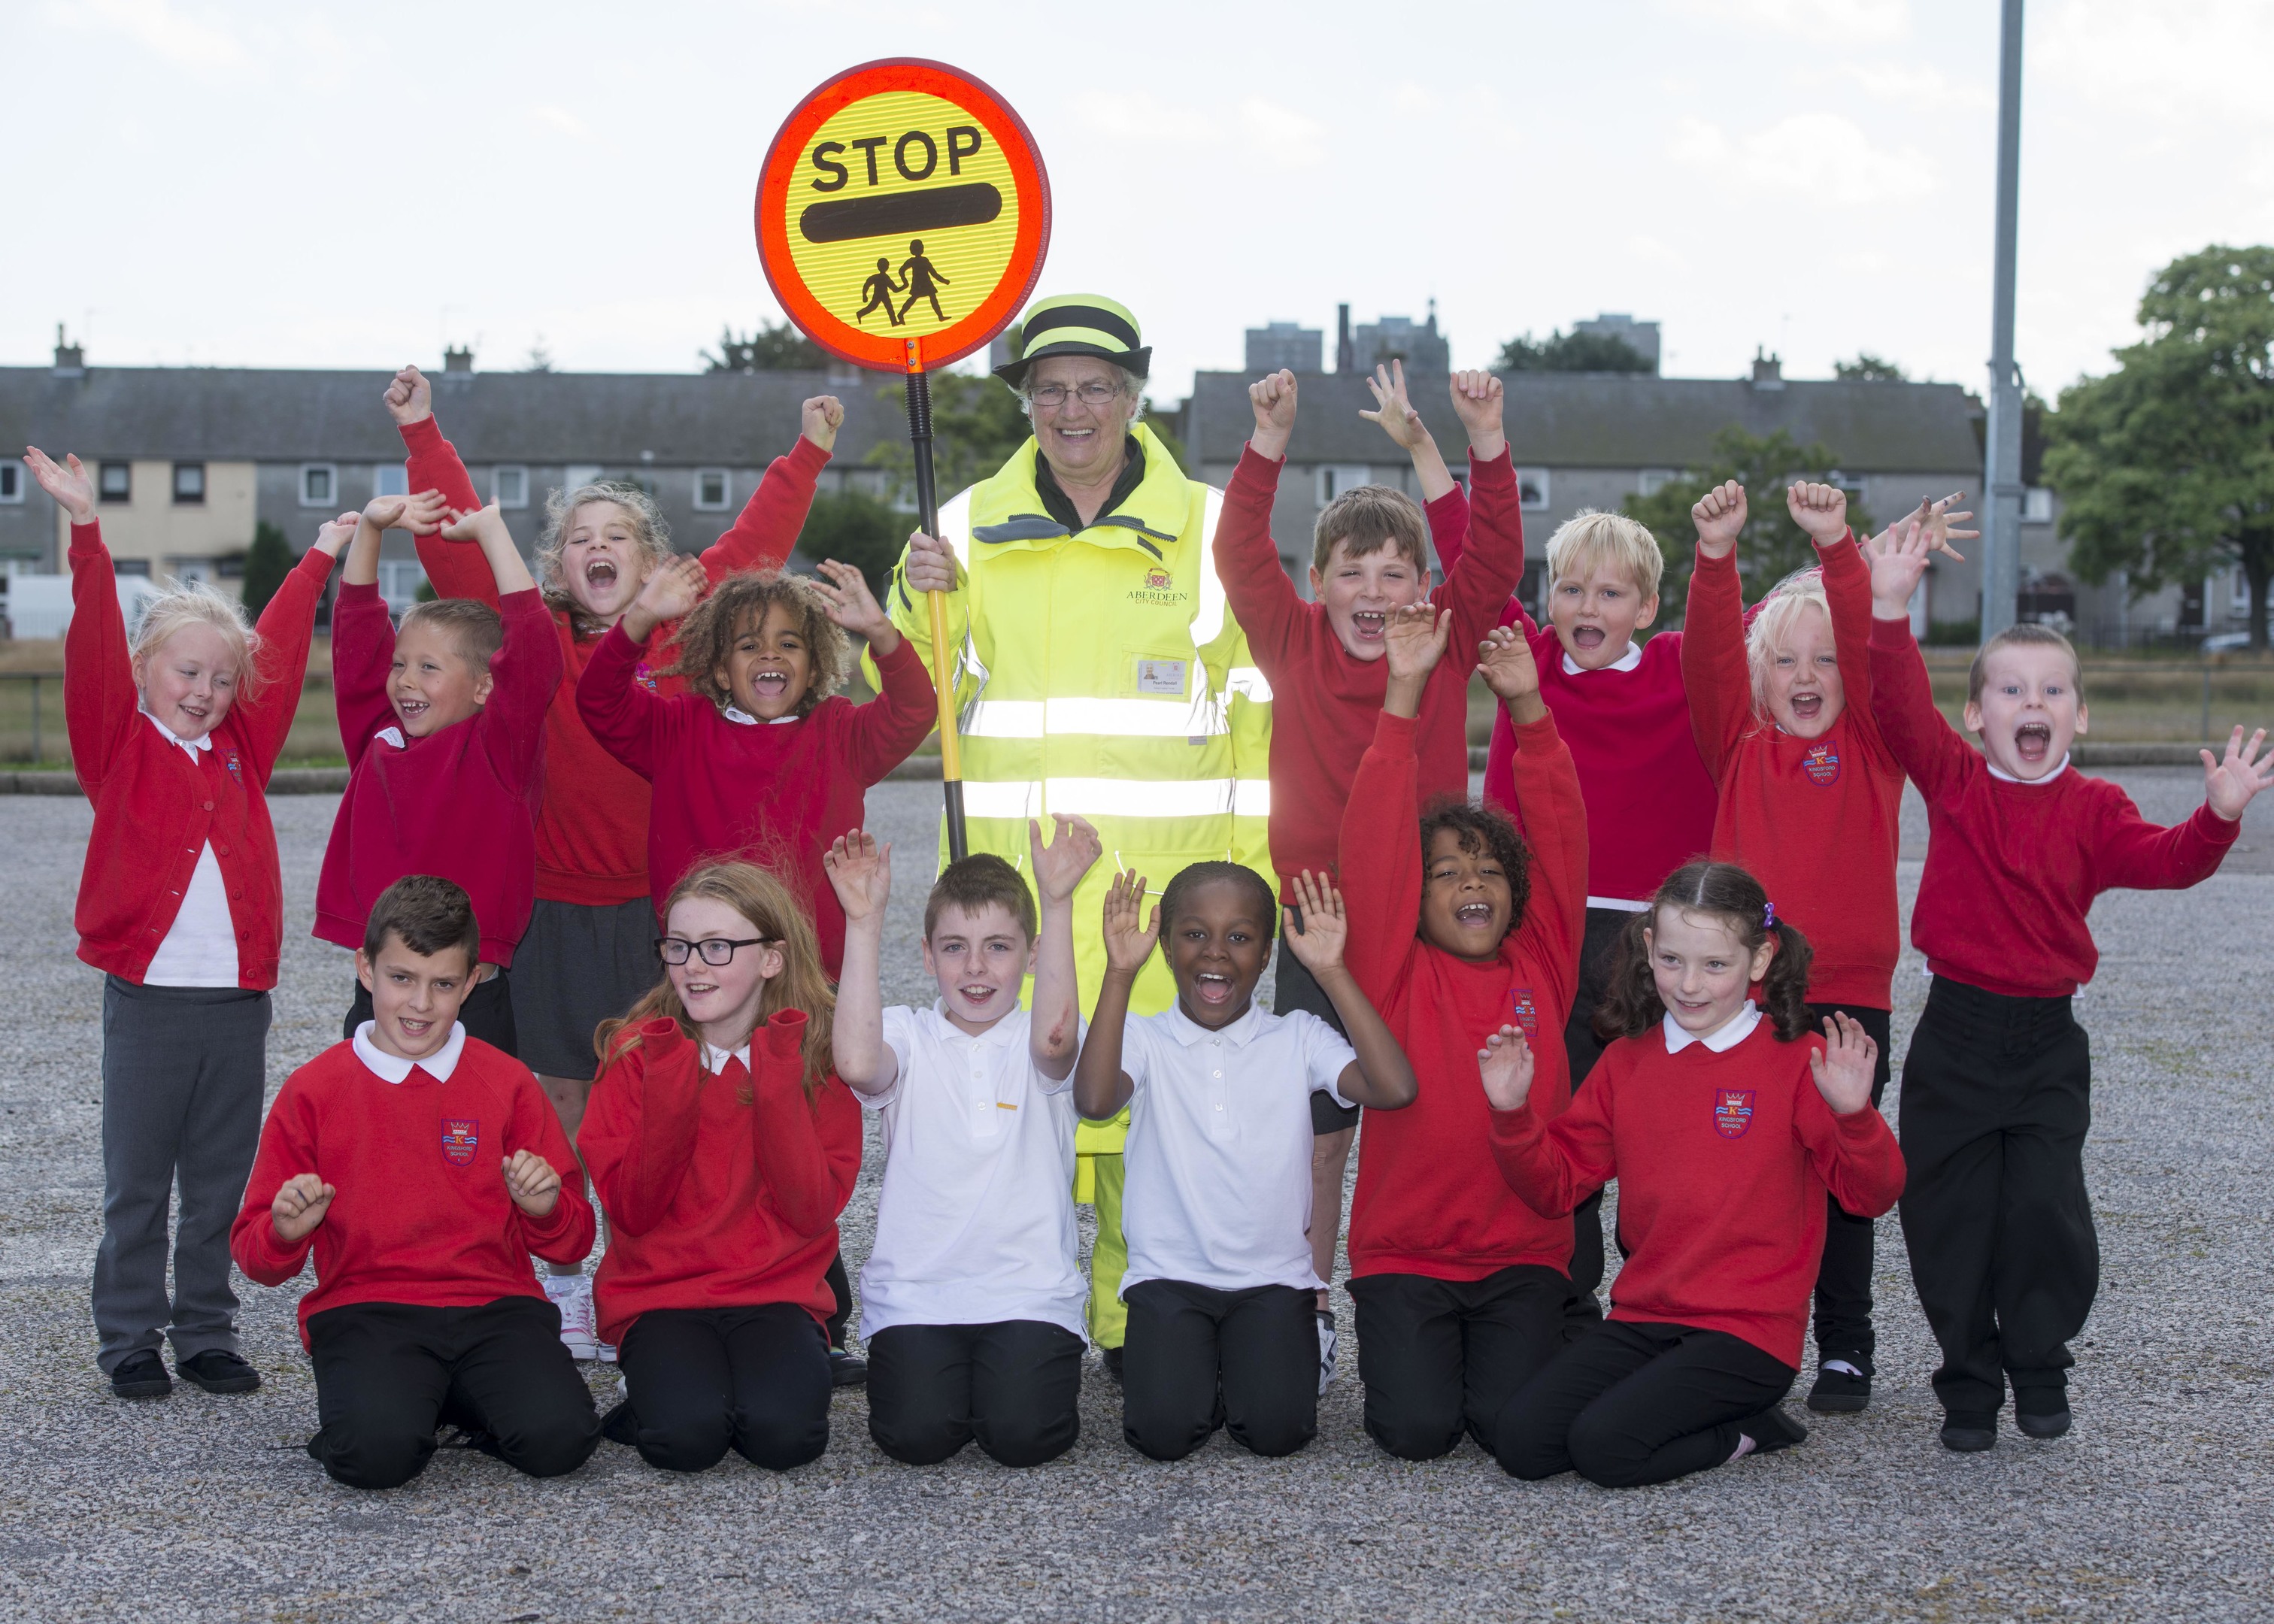 Pearl Rendall has been a lollipop lady in Aberdeen for more than 35 years